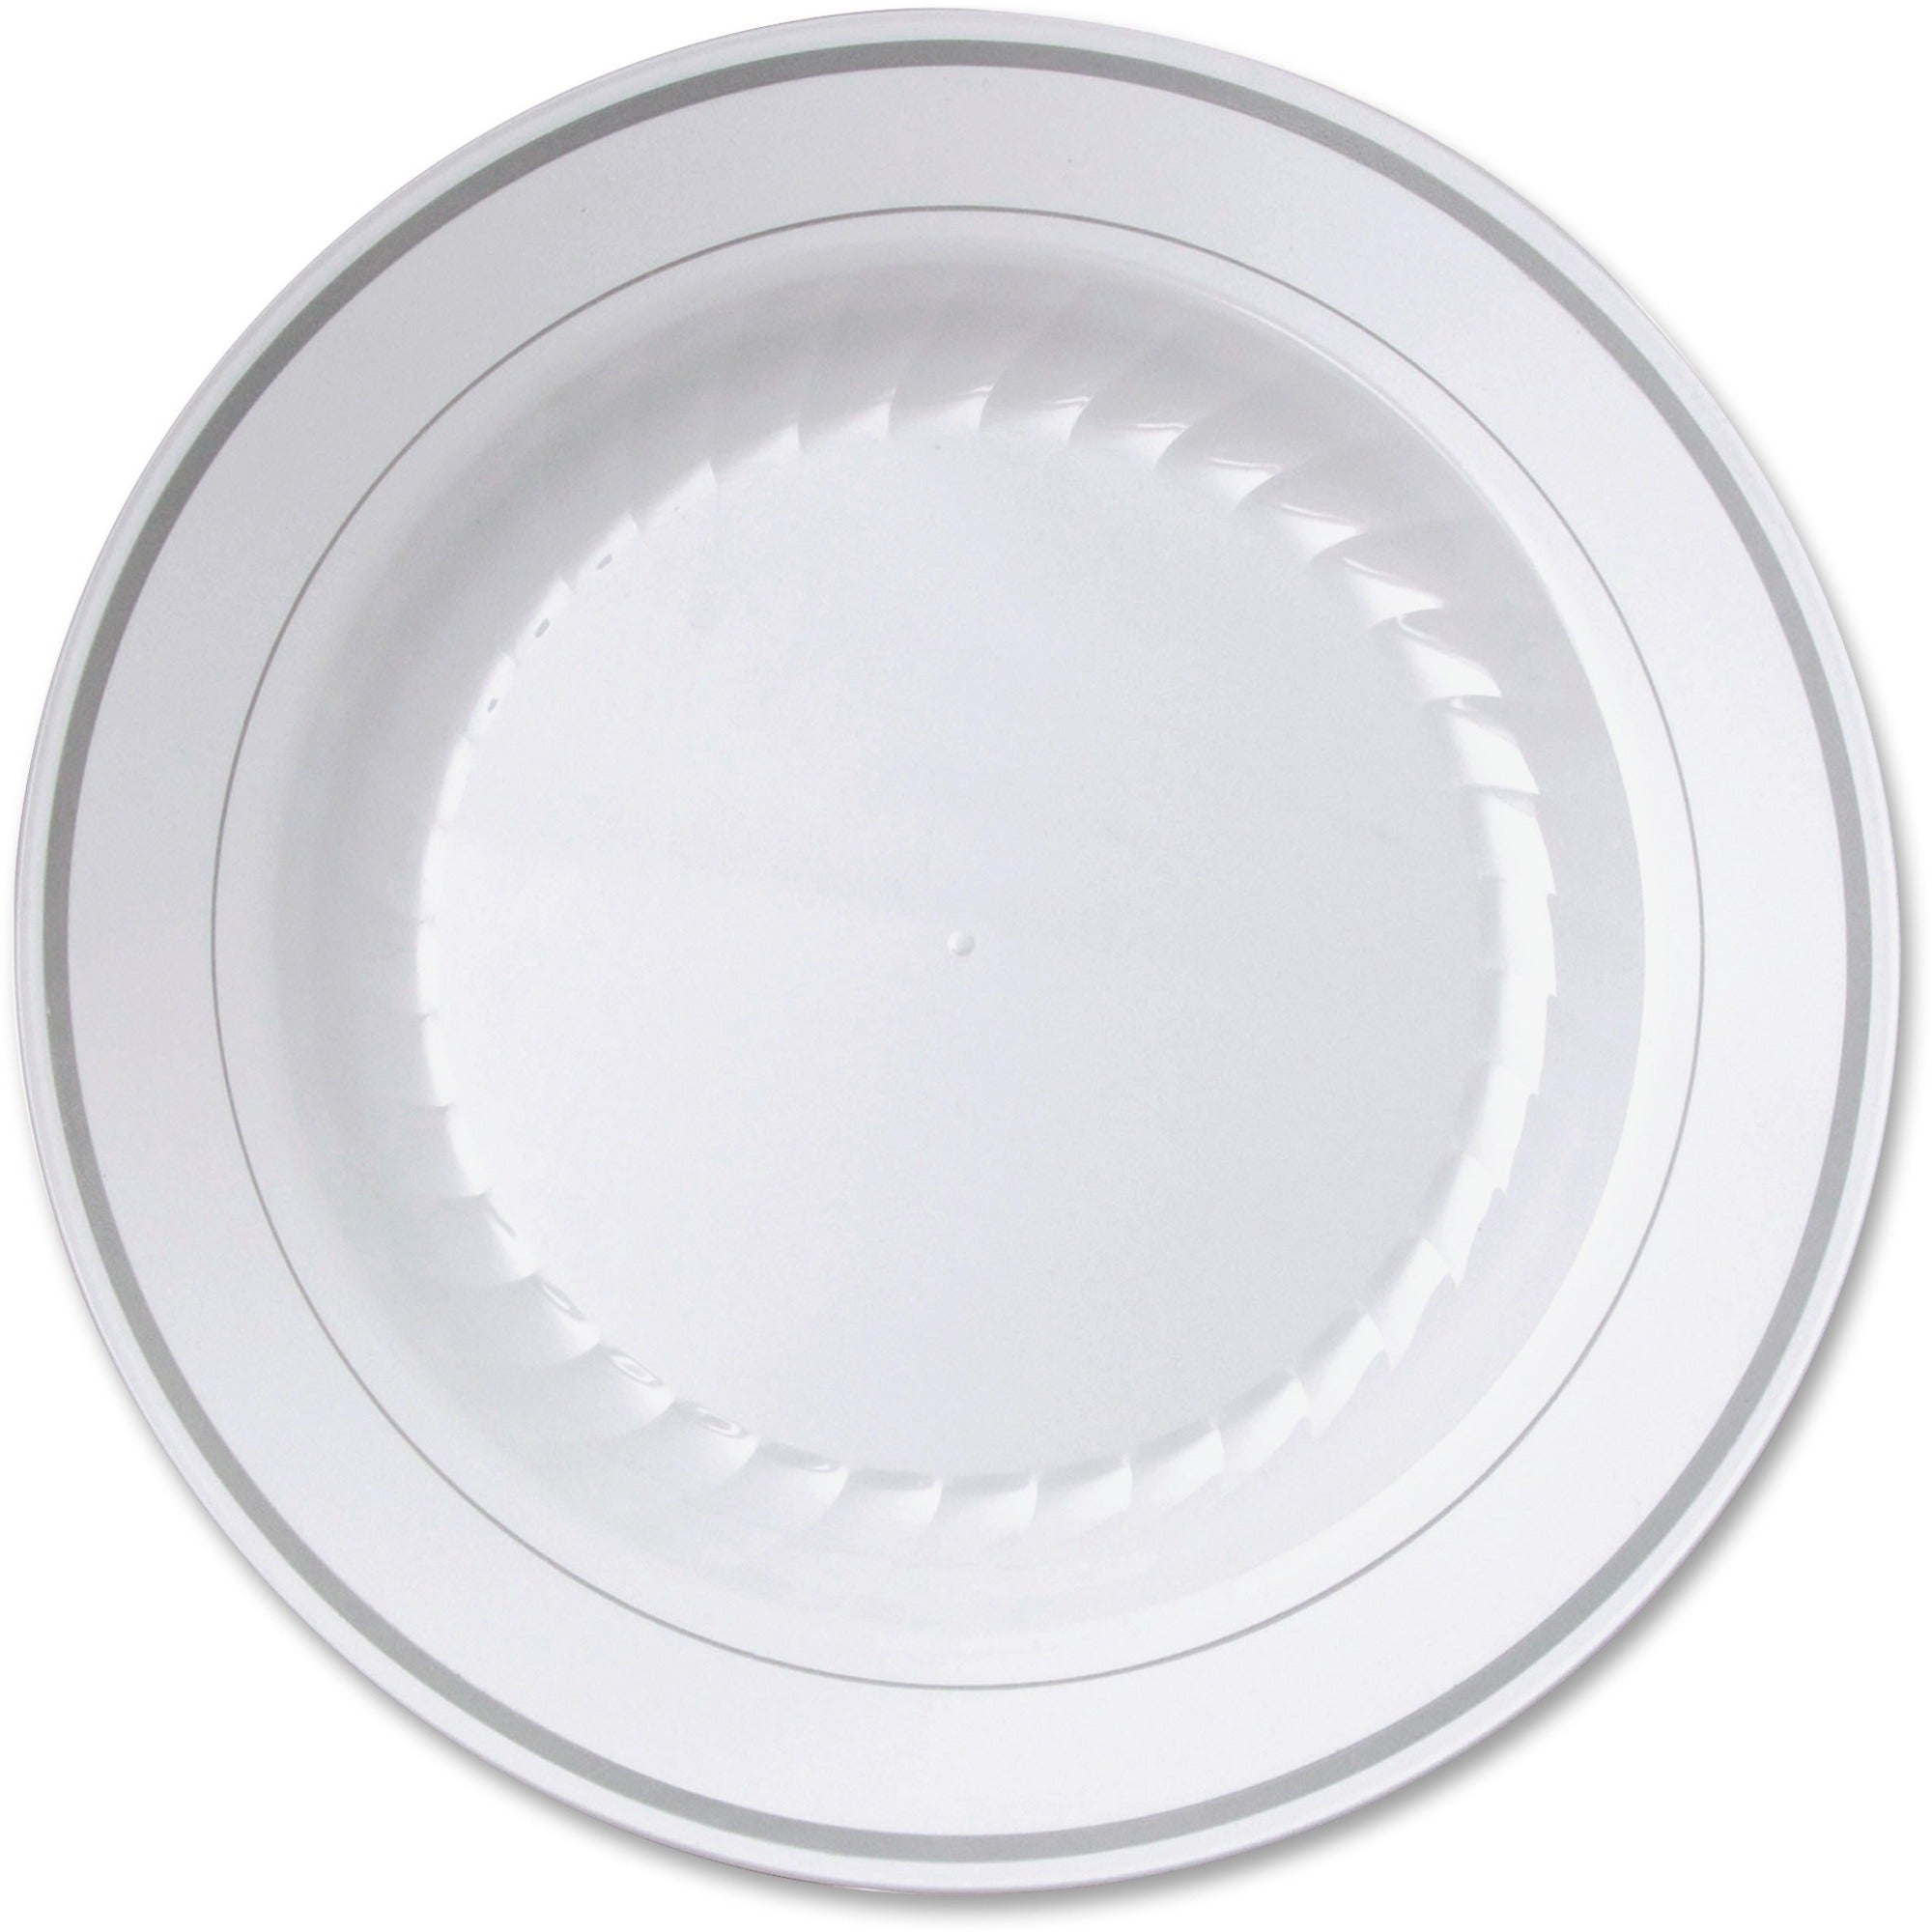 masterpiece-9-heavyweight-plates-10-pack-picnic-party-disposable-white-plastic-body-12-carton_wnarsmp91210wct - 1